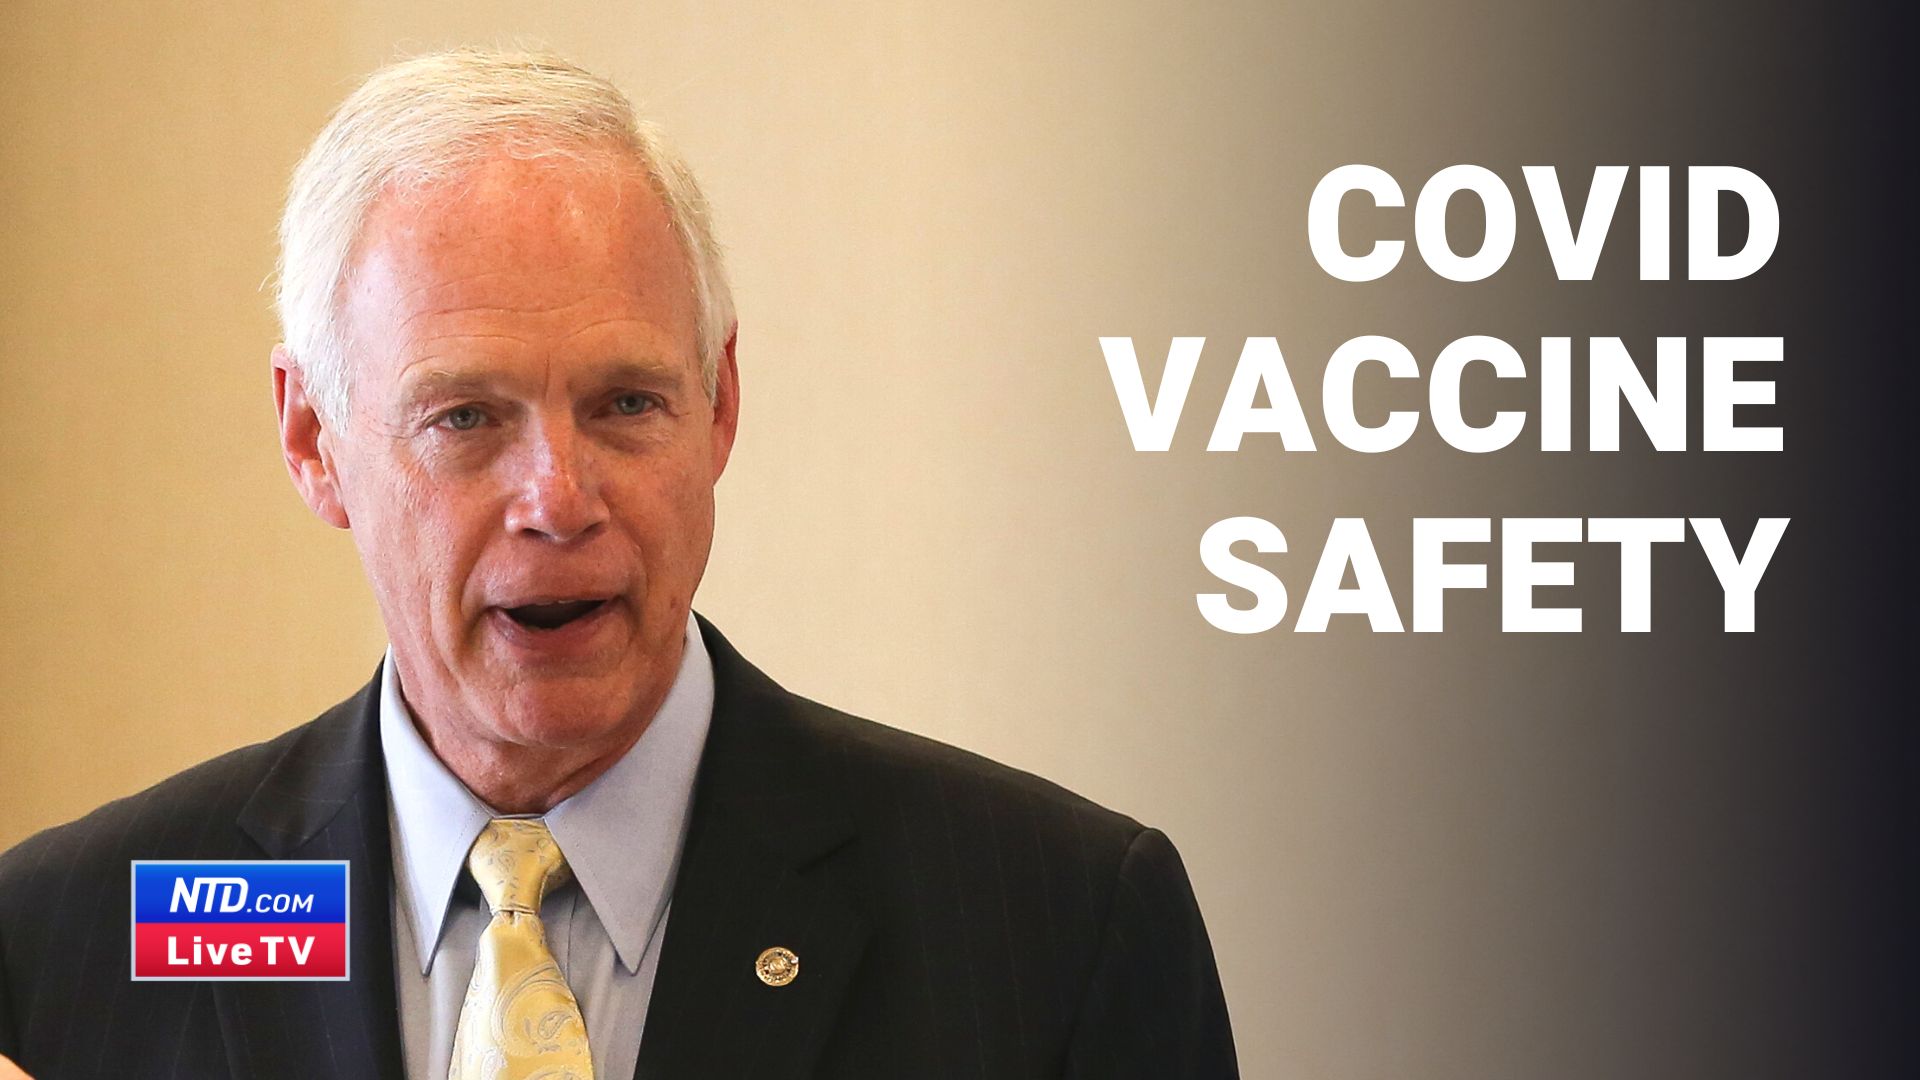 LIVE Dec. 7, 12 PM ET: COVID Vaccine Efficacy & Safety Conference With Sen. Johnson and Medical Experts